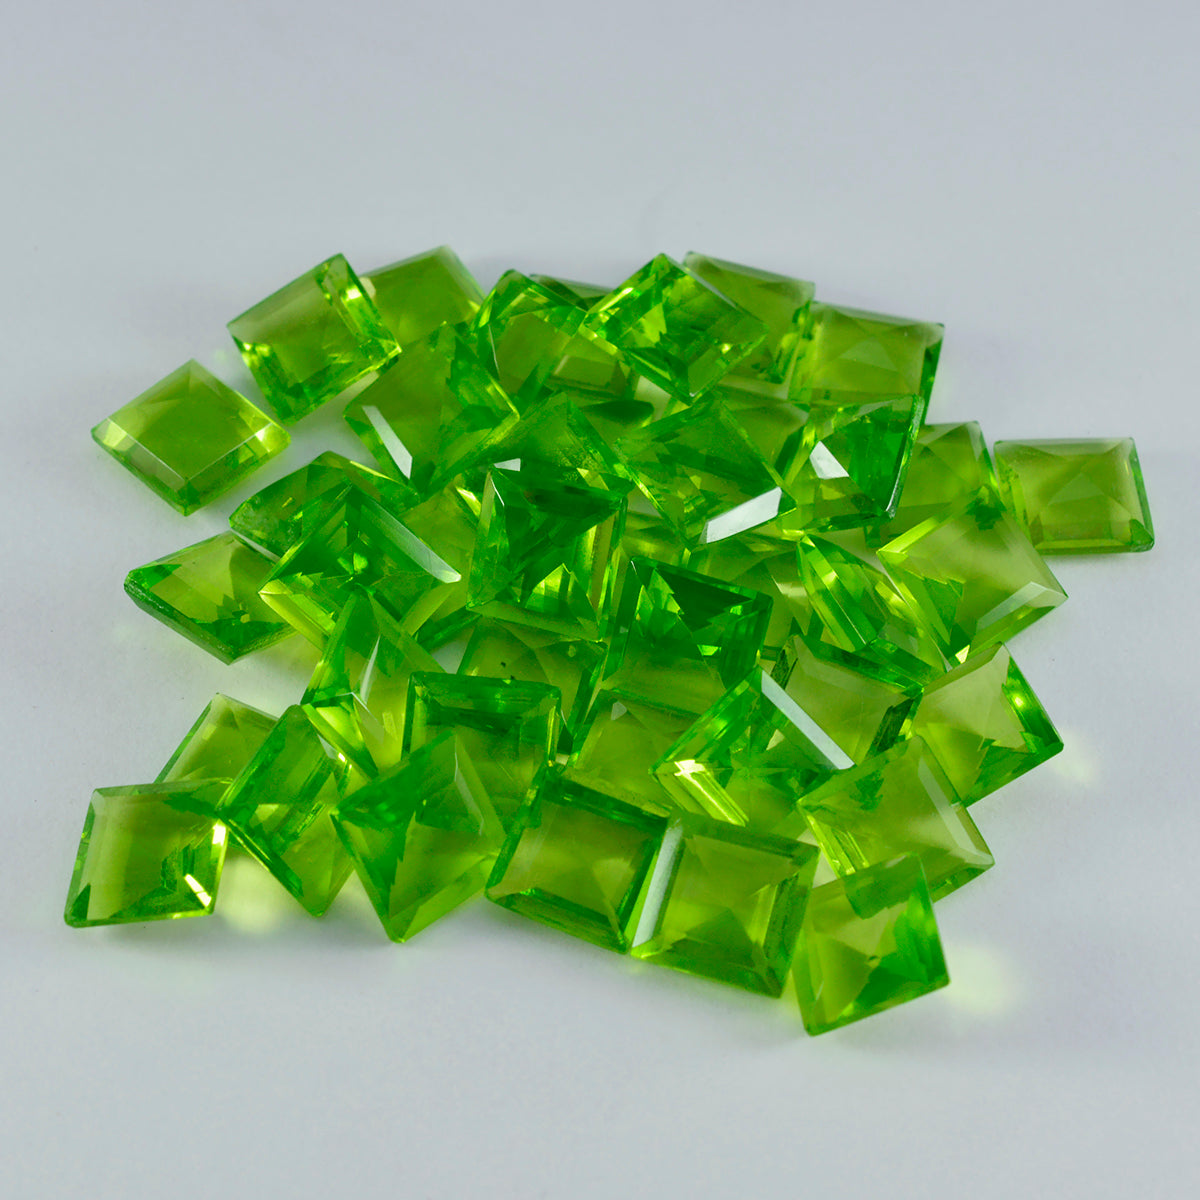 Riyogems 1PC Green Peridot CZ Faceted 4x4 mm Square Shape nice-looking Quality Loose Gem